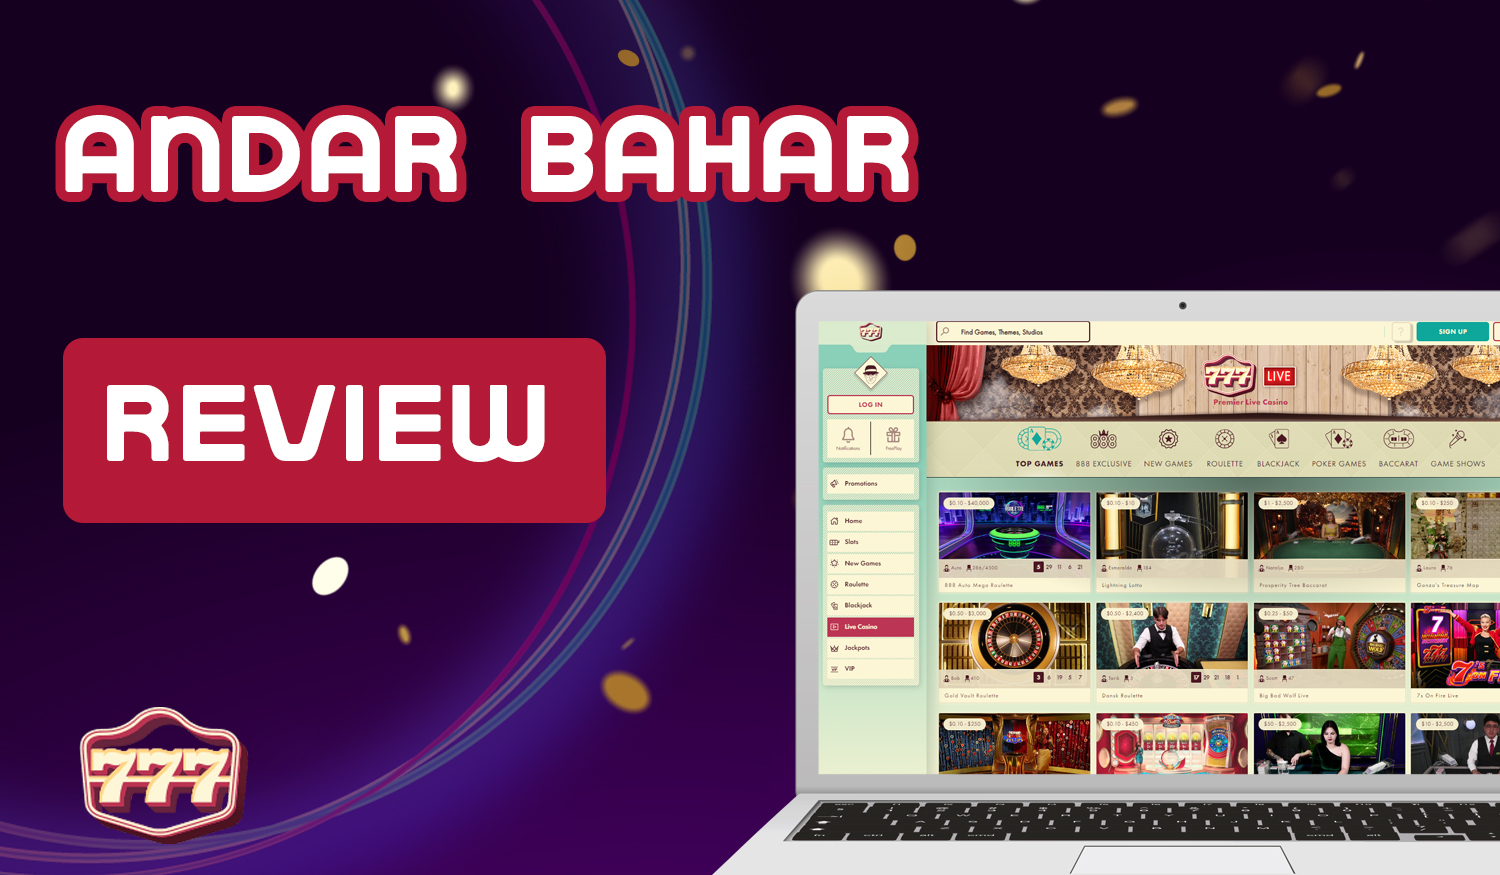 Basic rules and tricks to successfully play Andar Bahar at 777 Casino